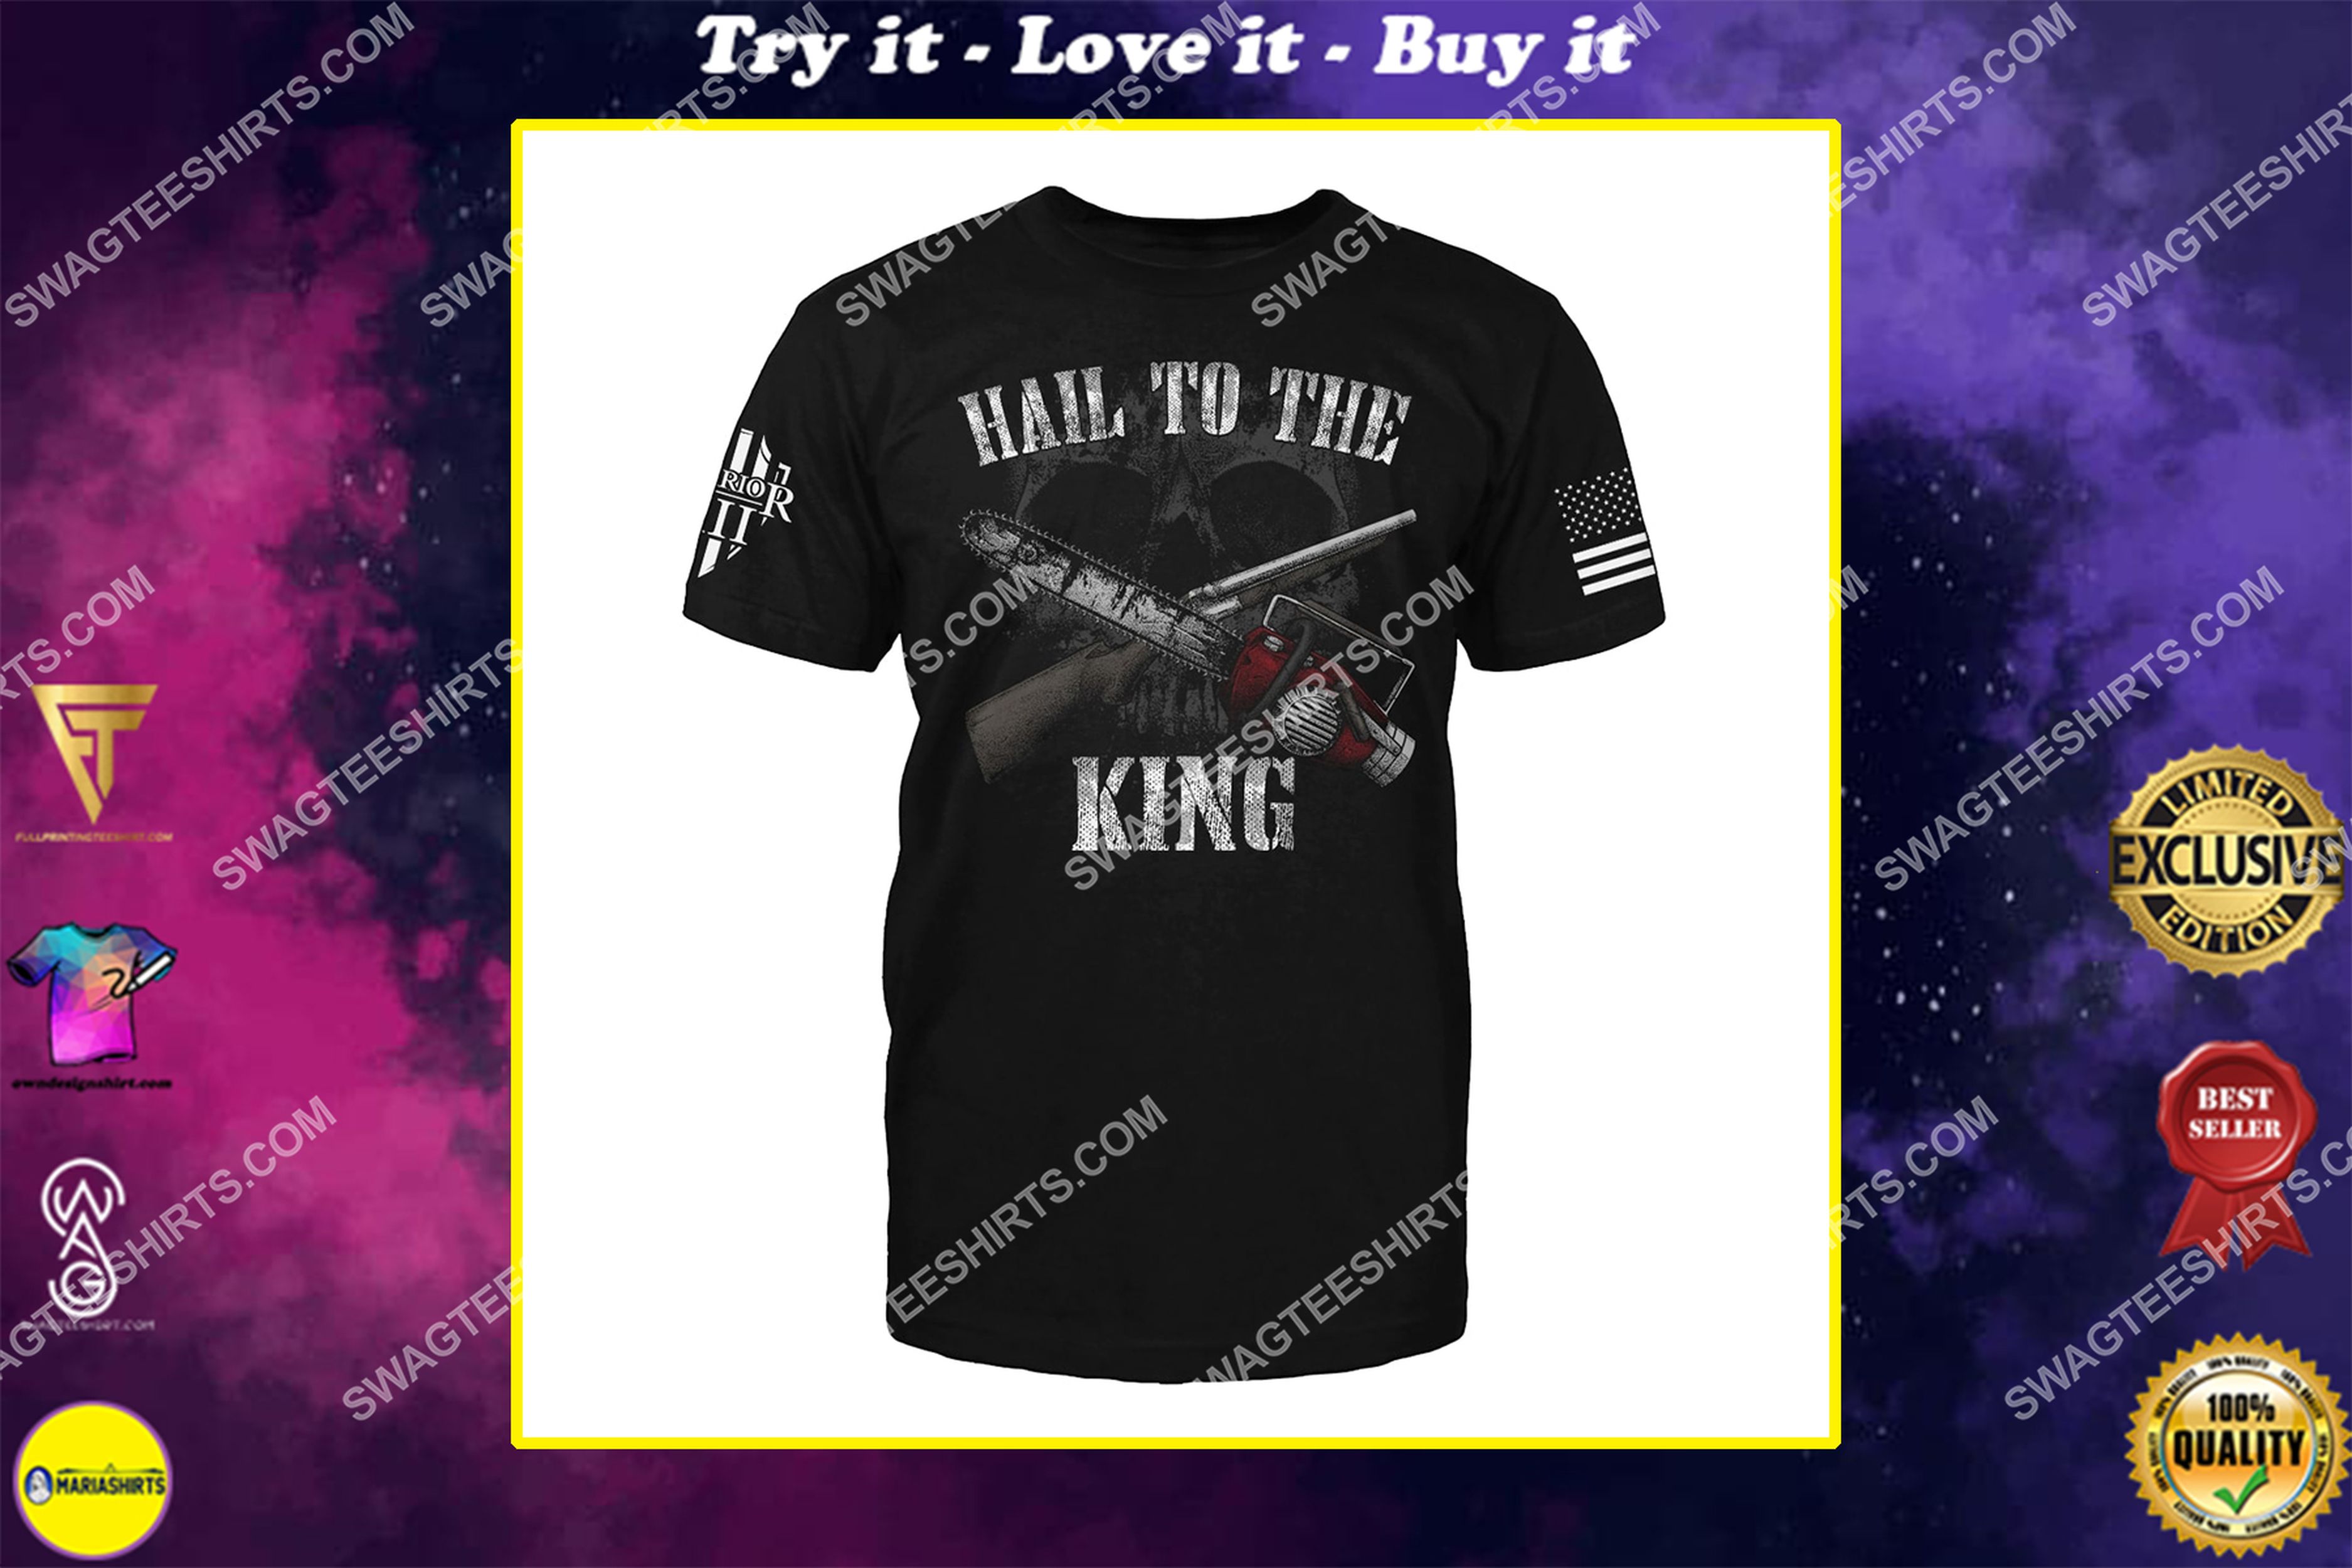 [special edition] hail to the king avenged sevenfold shirt – maria